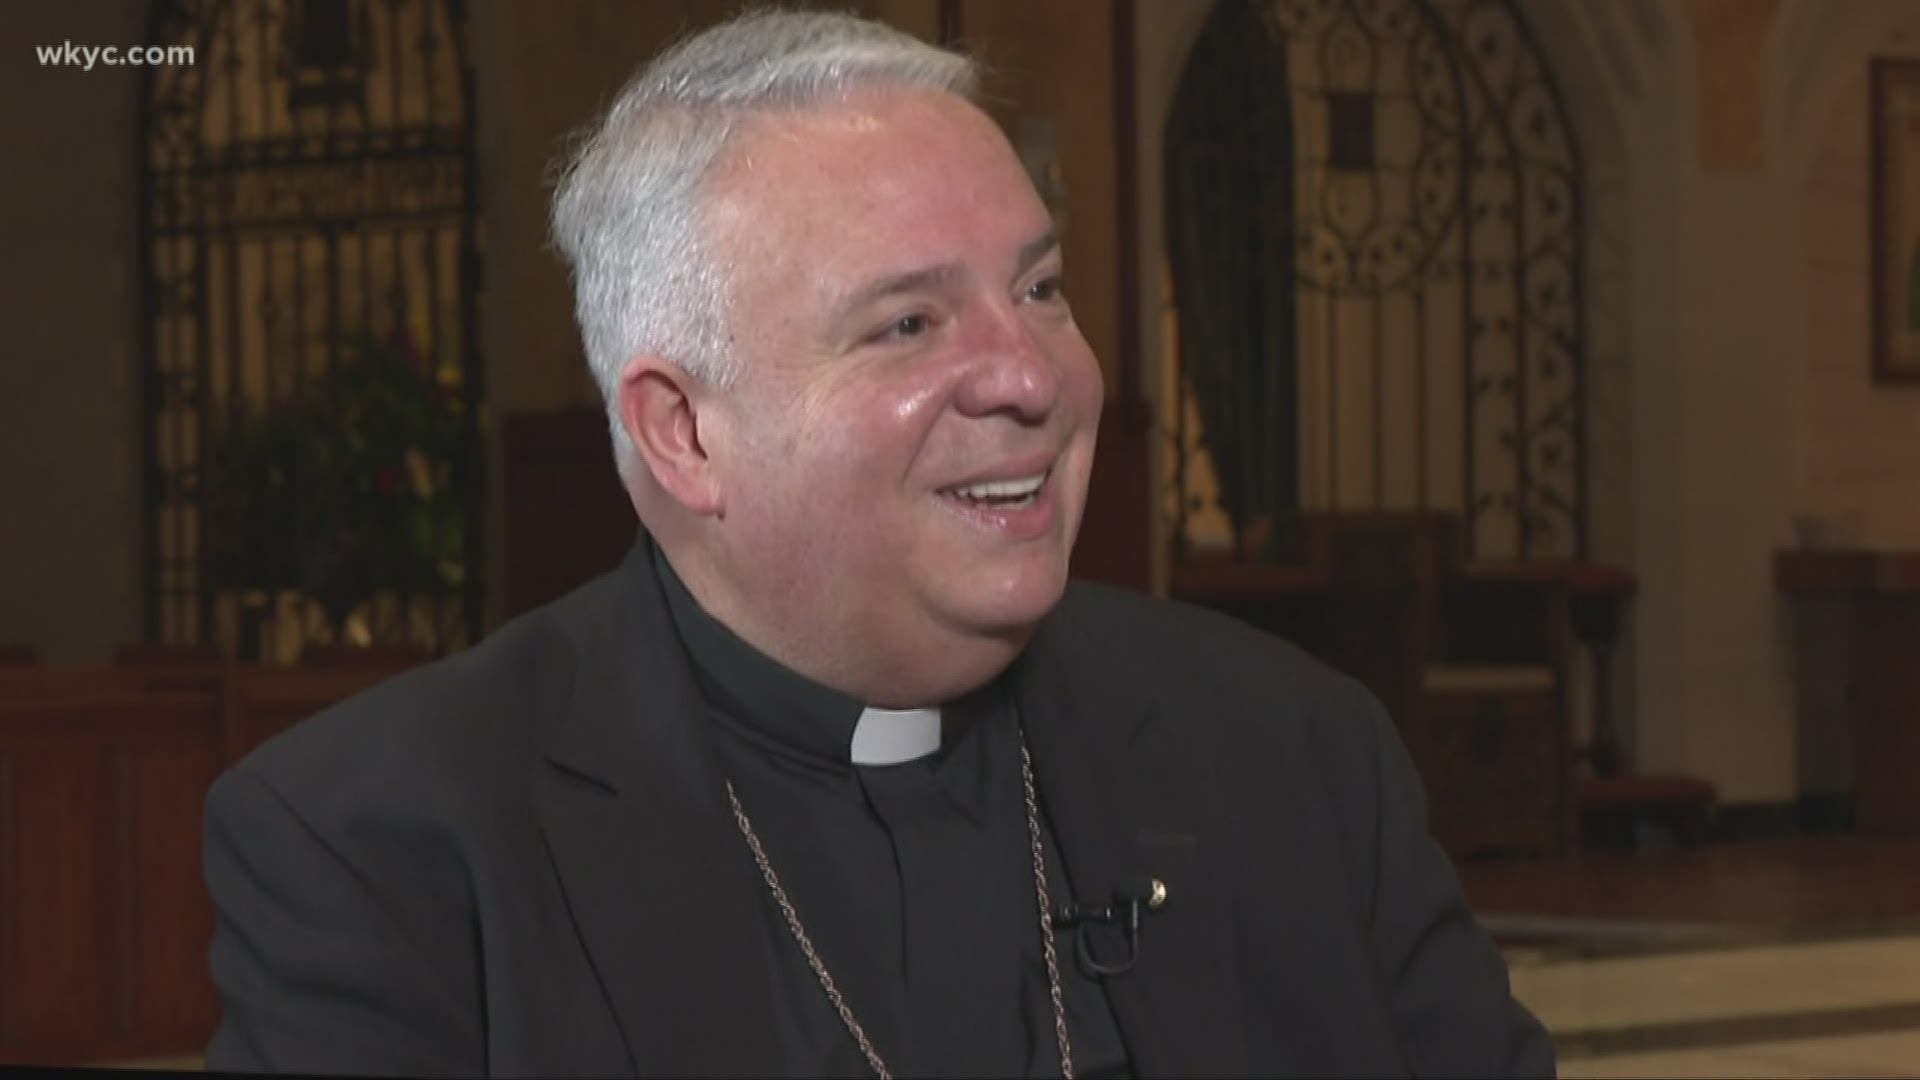 Roman Catholic Bishop of Cleveland Nelson J. Perez has been called to serve as the new Archbishop of Philadelphia. He served Cleveland since September of 2017.